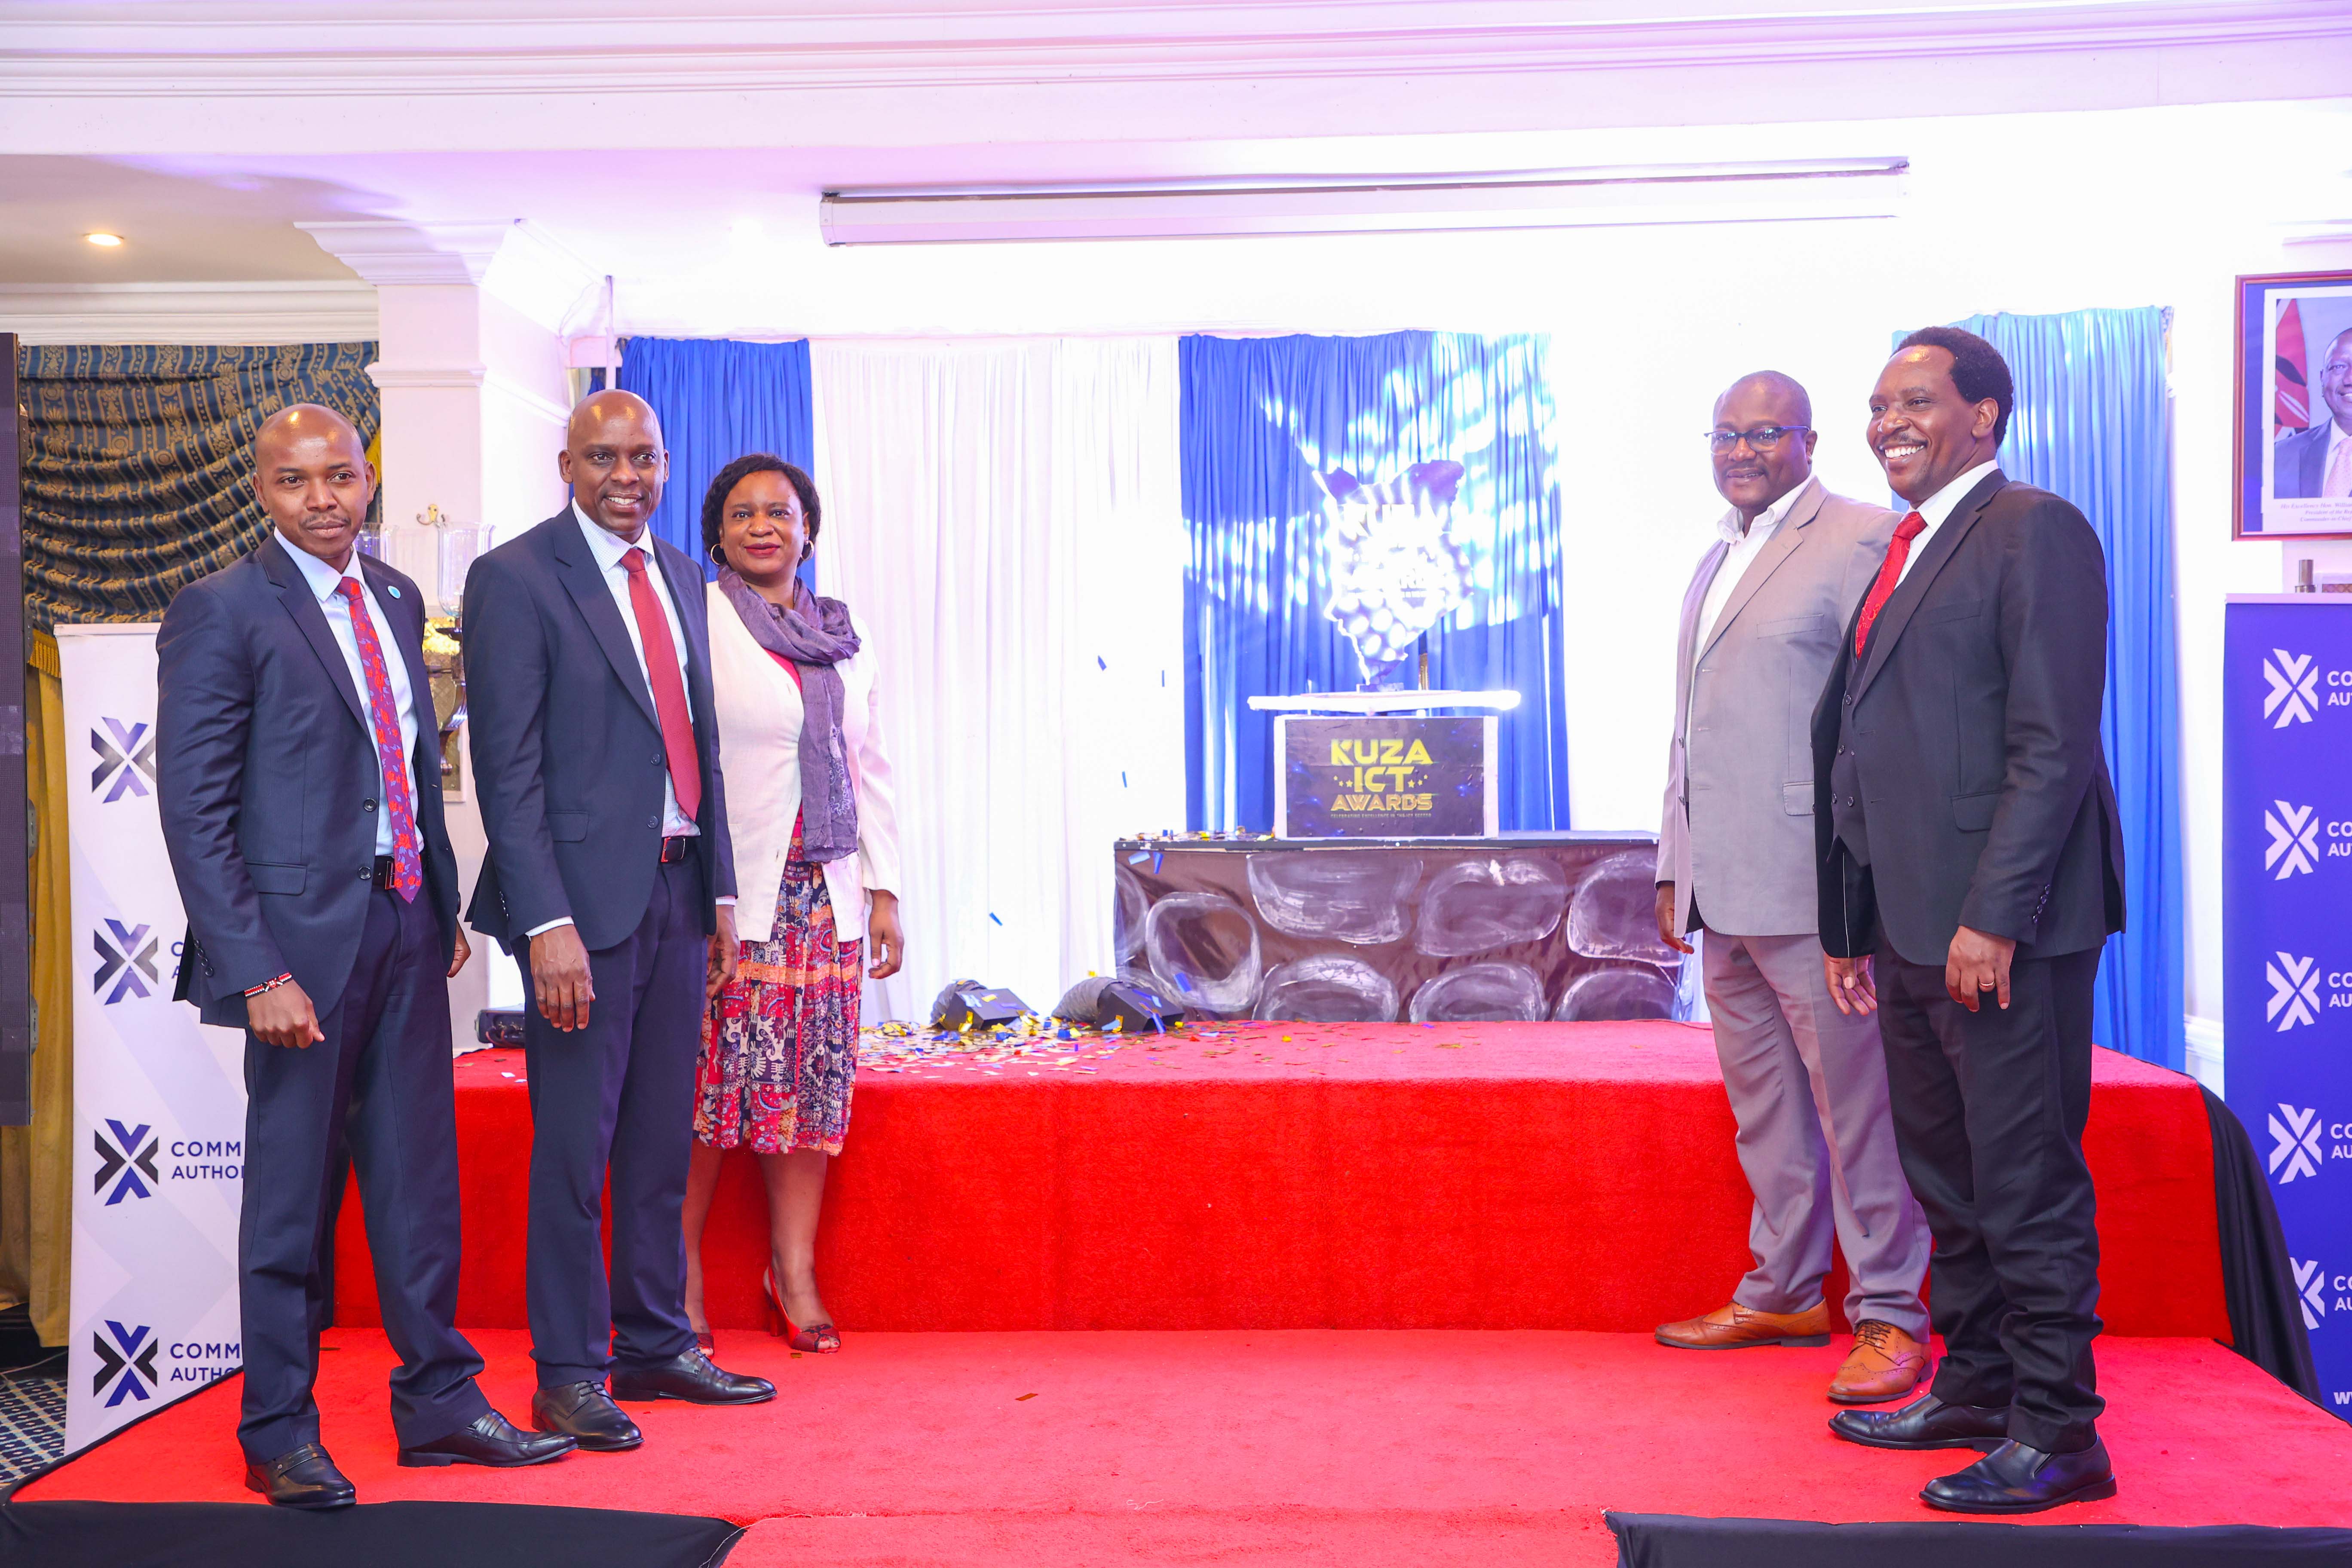 CA Director General David Mugonyi (second left) with other ICT industry stakeholders during the launch of the Kuza ICT Awards in Nairobi.